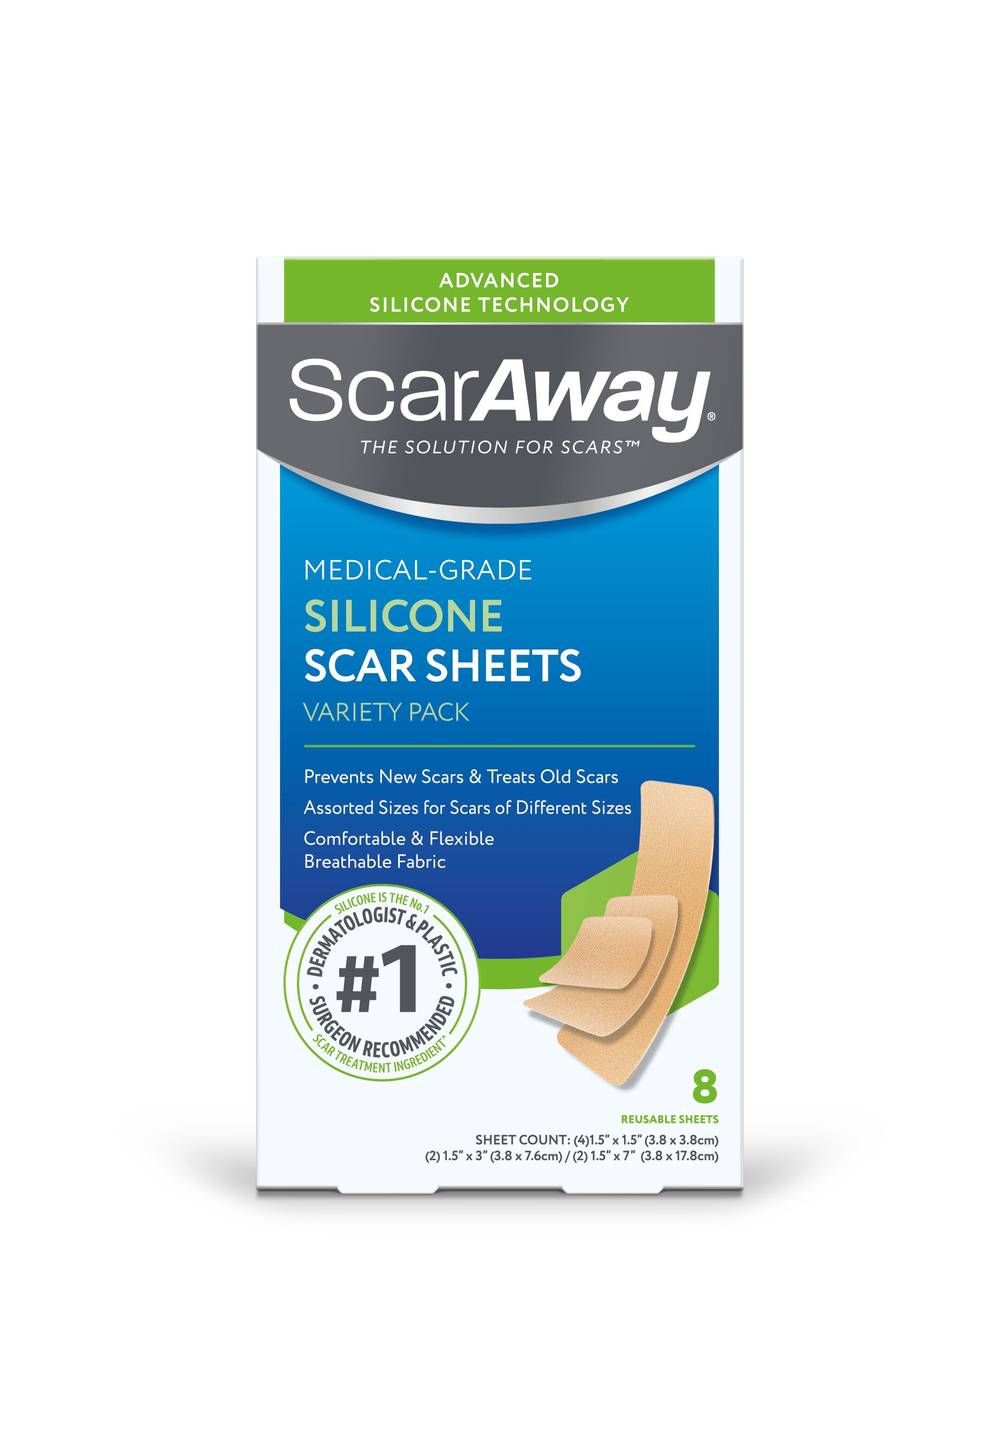 Scaraway Medical-Grade Silicone Scar Sheets Variety pack